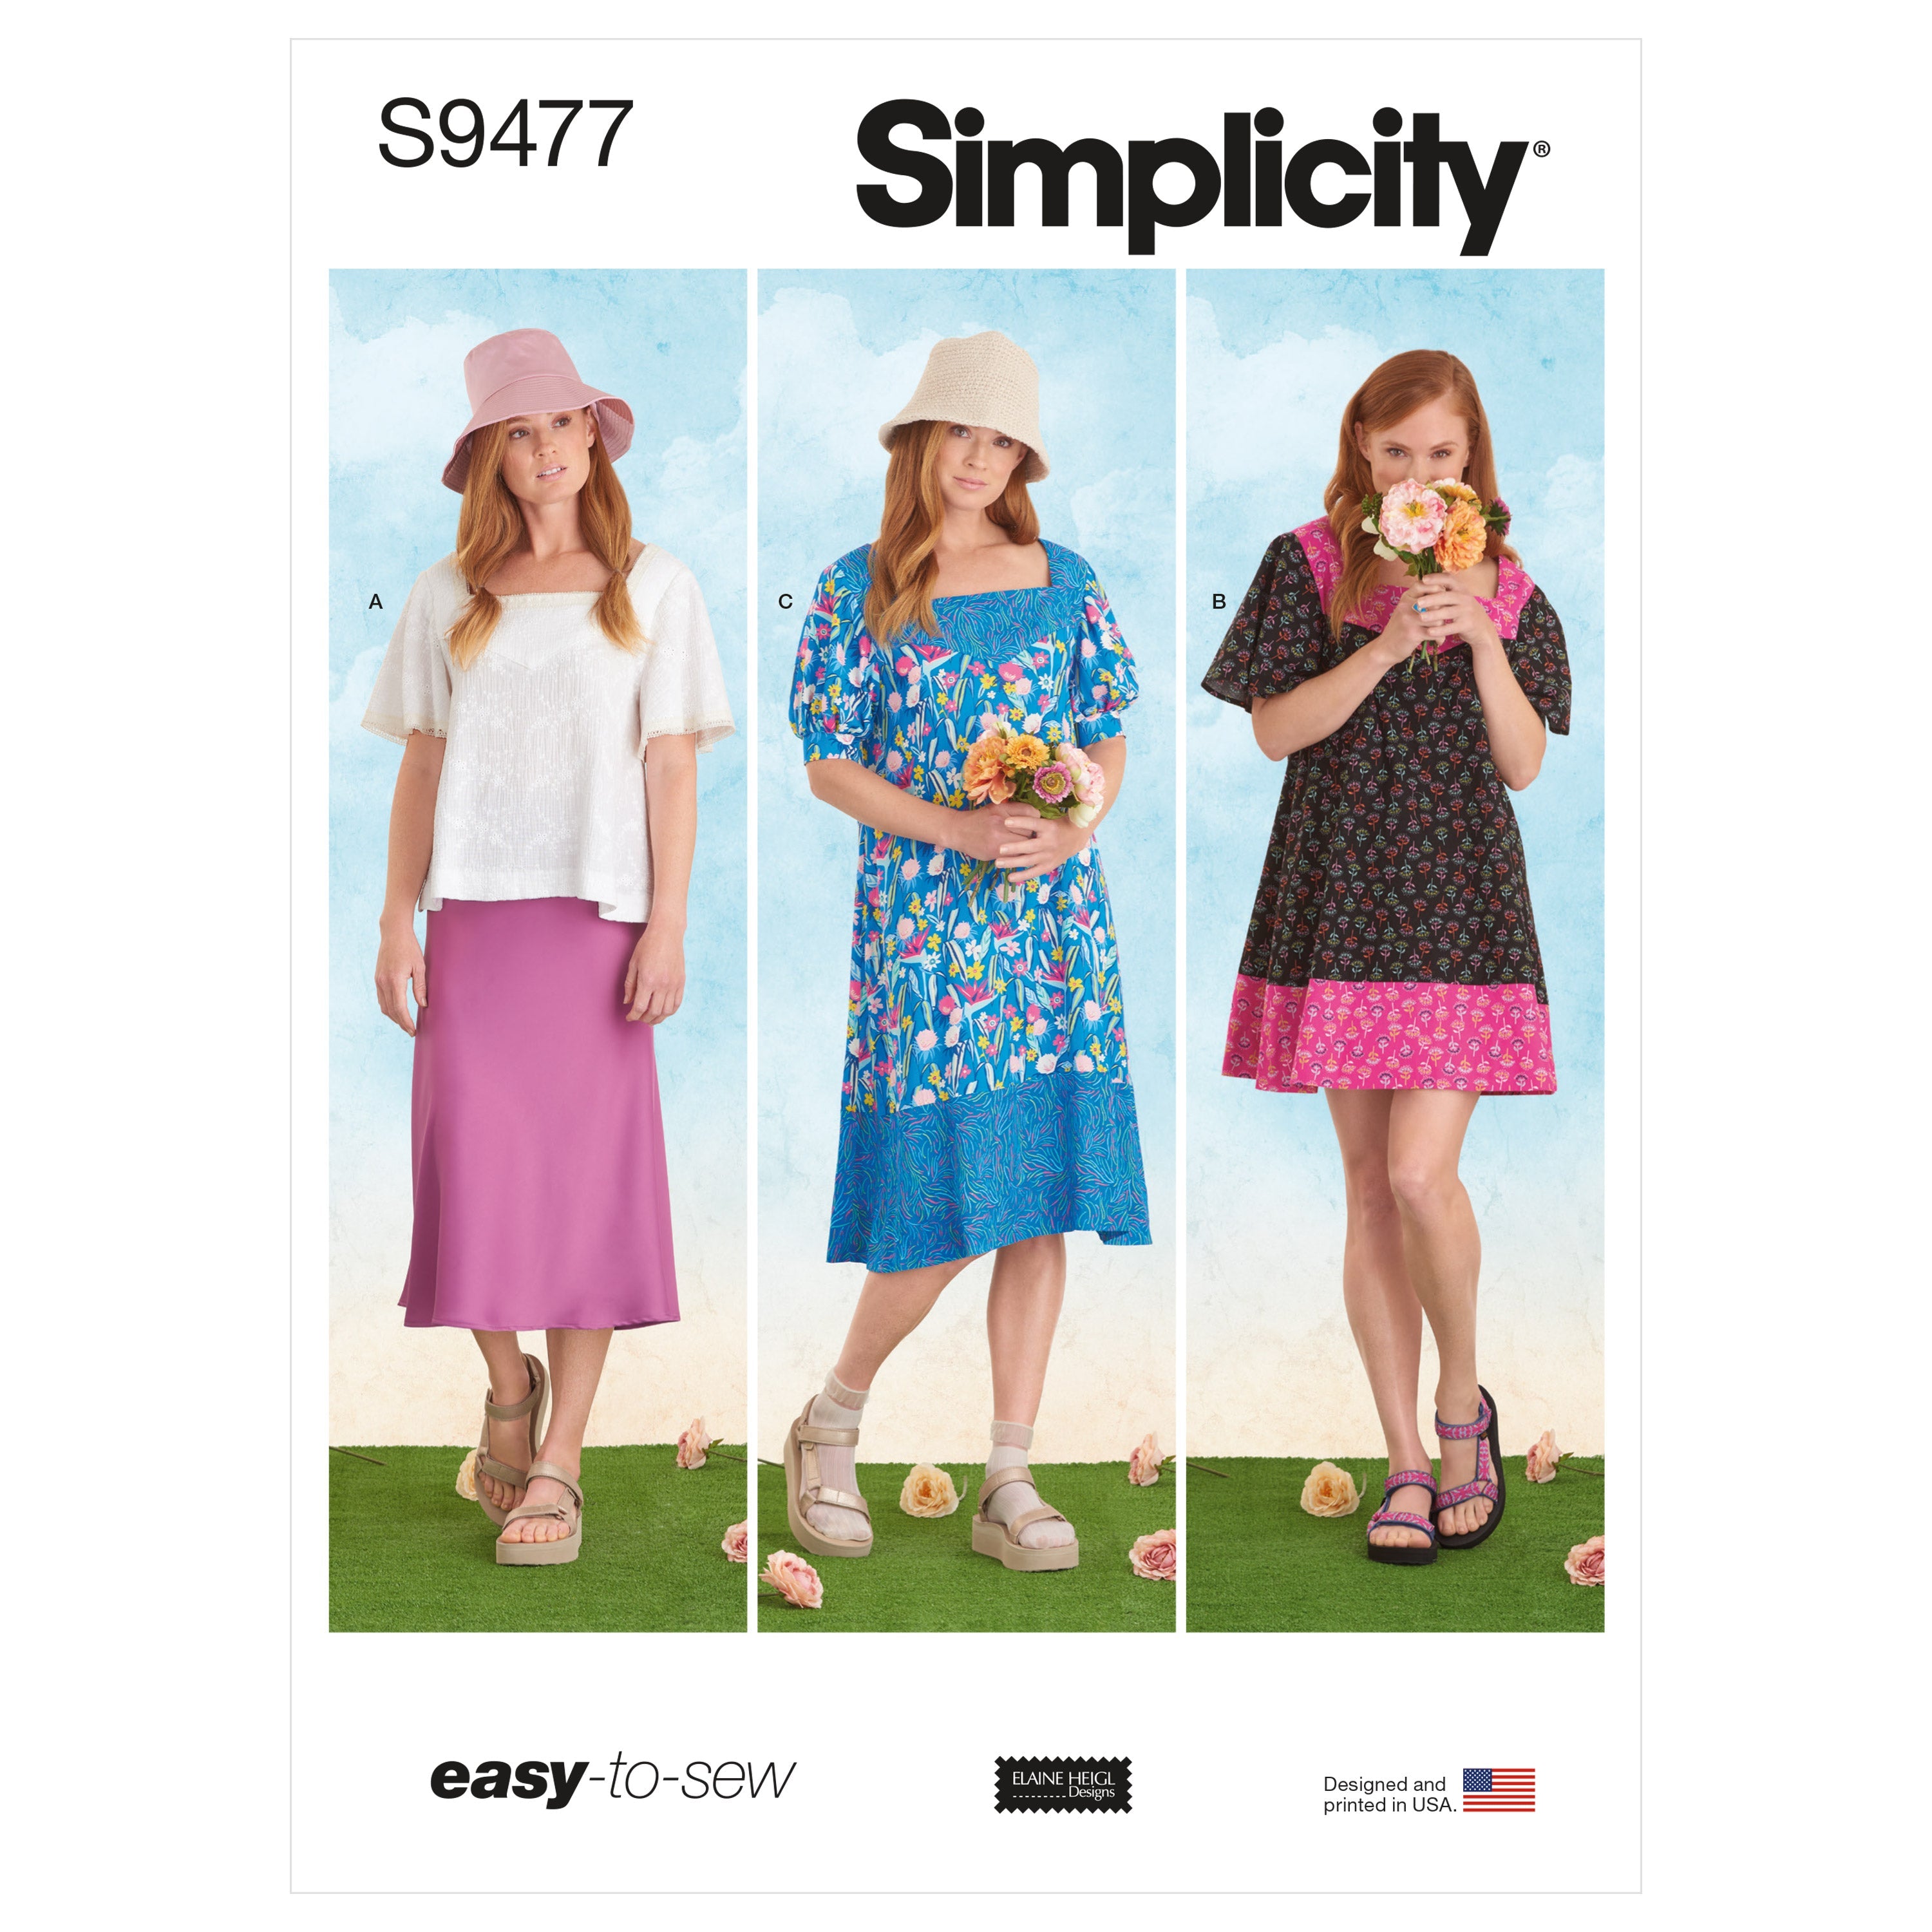 Simplicity Sewing Pattern 9477 Misses Top and Dresses from Jaycotts Sewing Supplies